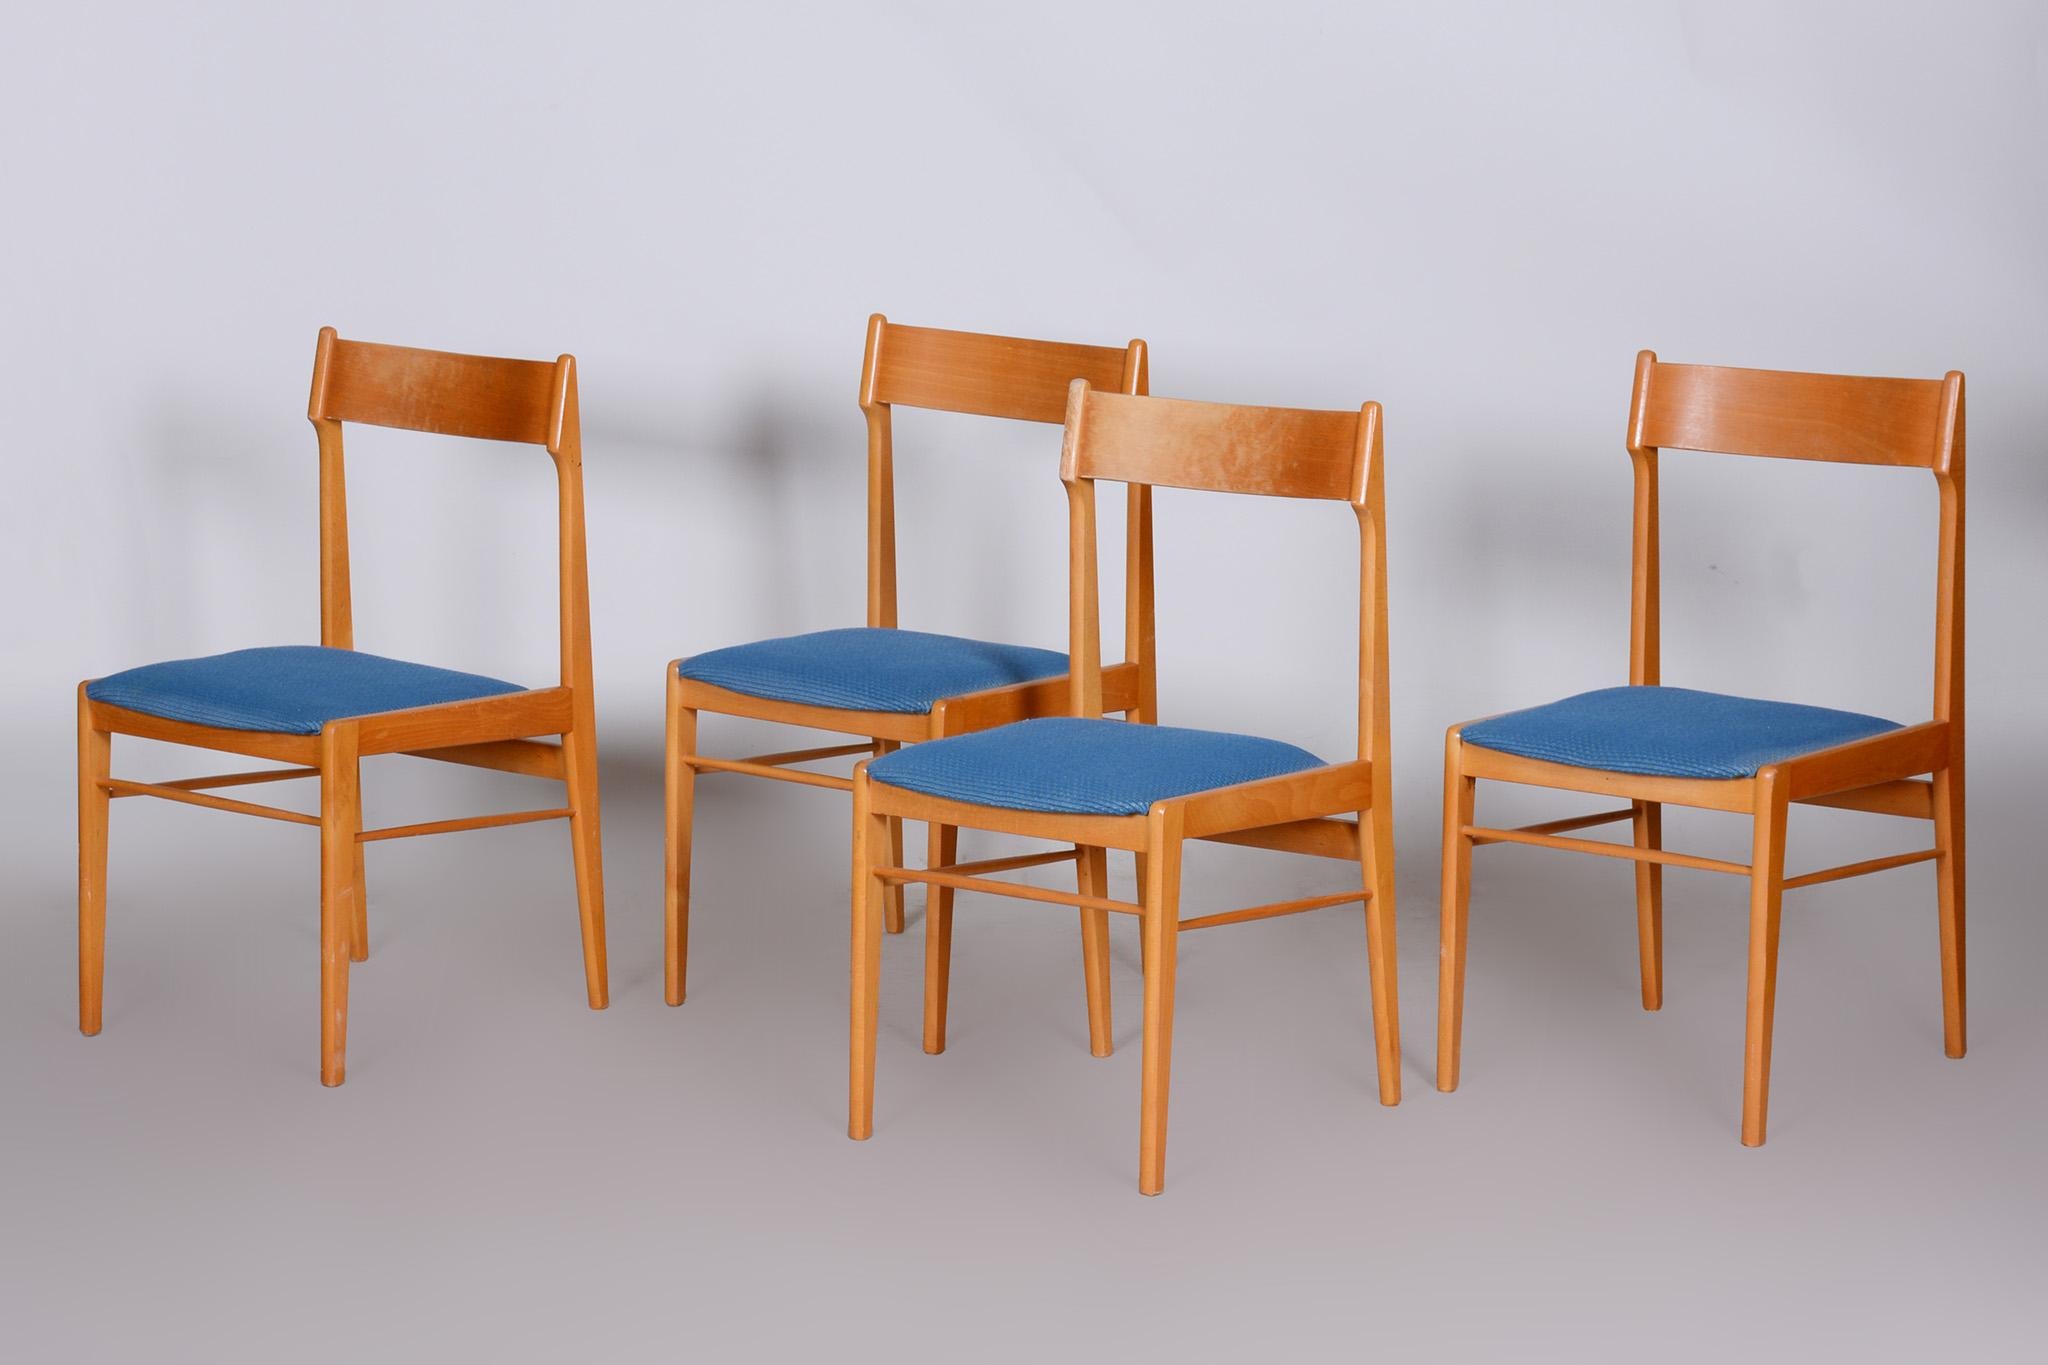 Czech Blue and Brown Dining Chairs 4 Pcs, Well Preserved Original Condition, 1950s For Sale